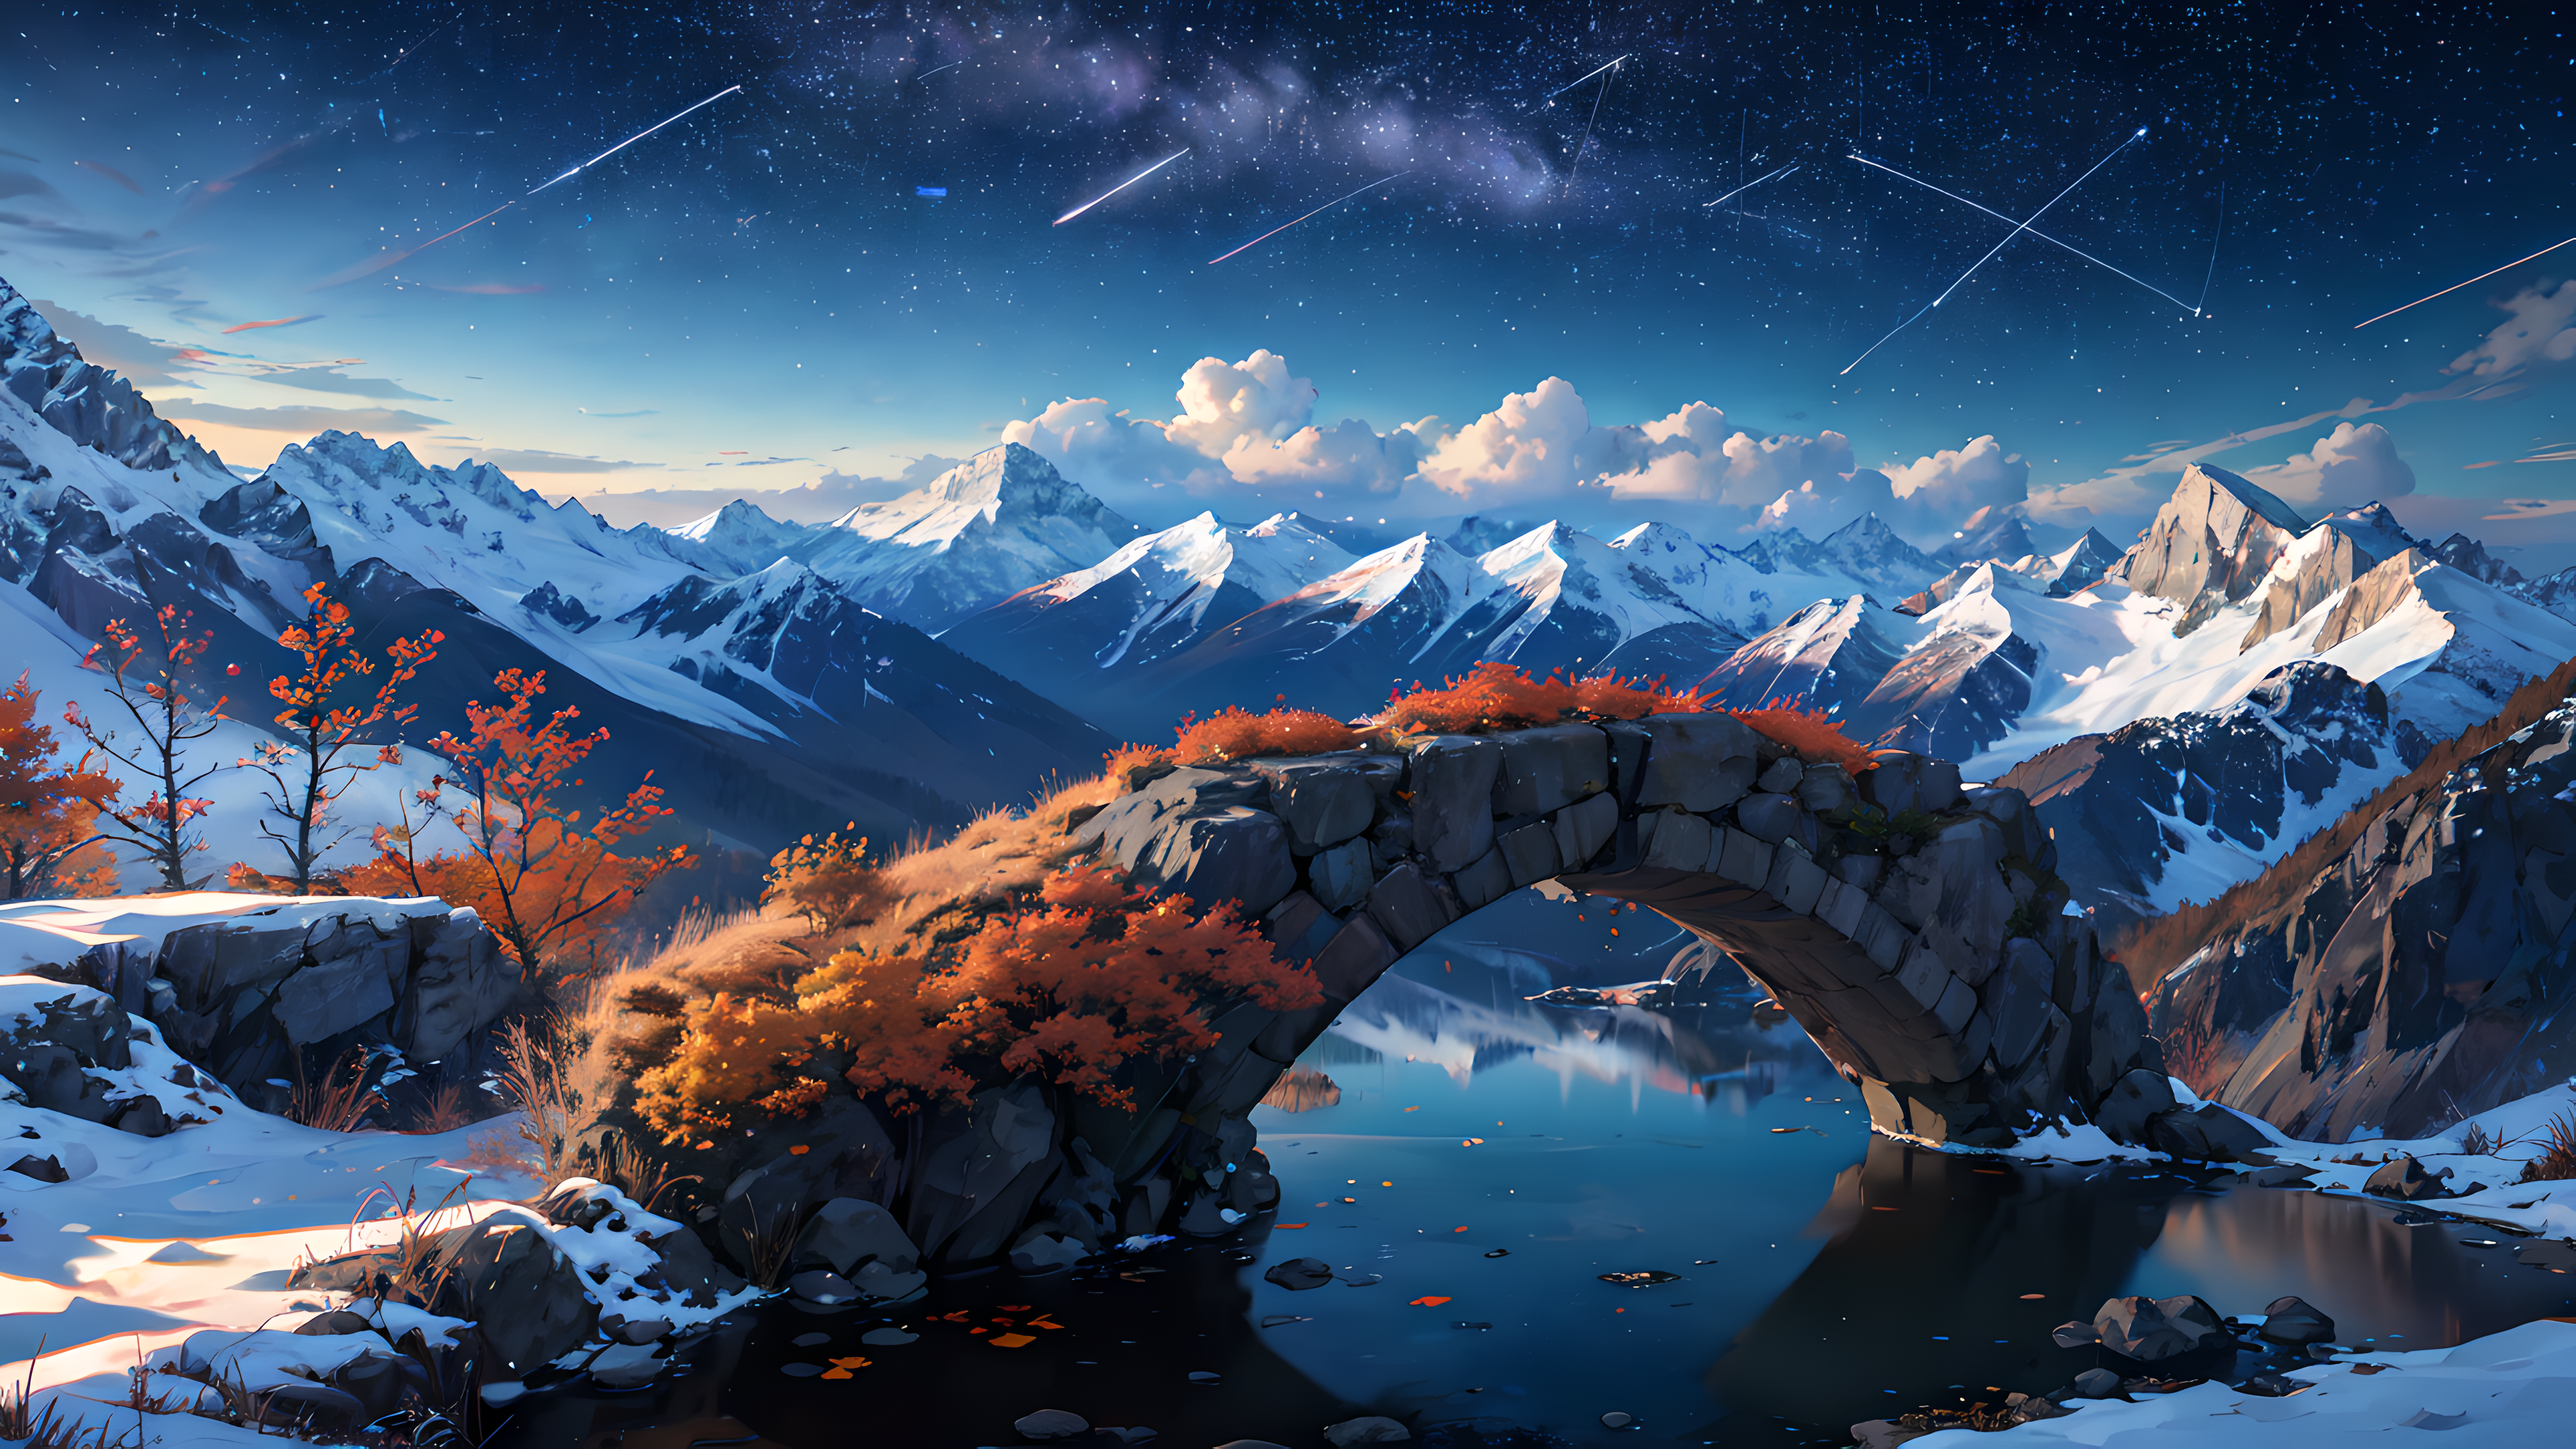 Ai Art Snowy Peak Water Arch Bridge Snow Covered Mountains Maple Leaf Nature Snow Reflection Stars S 3840x2160